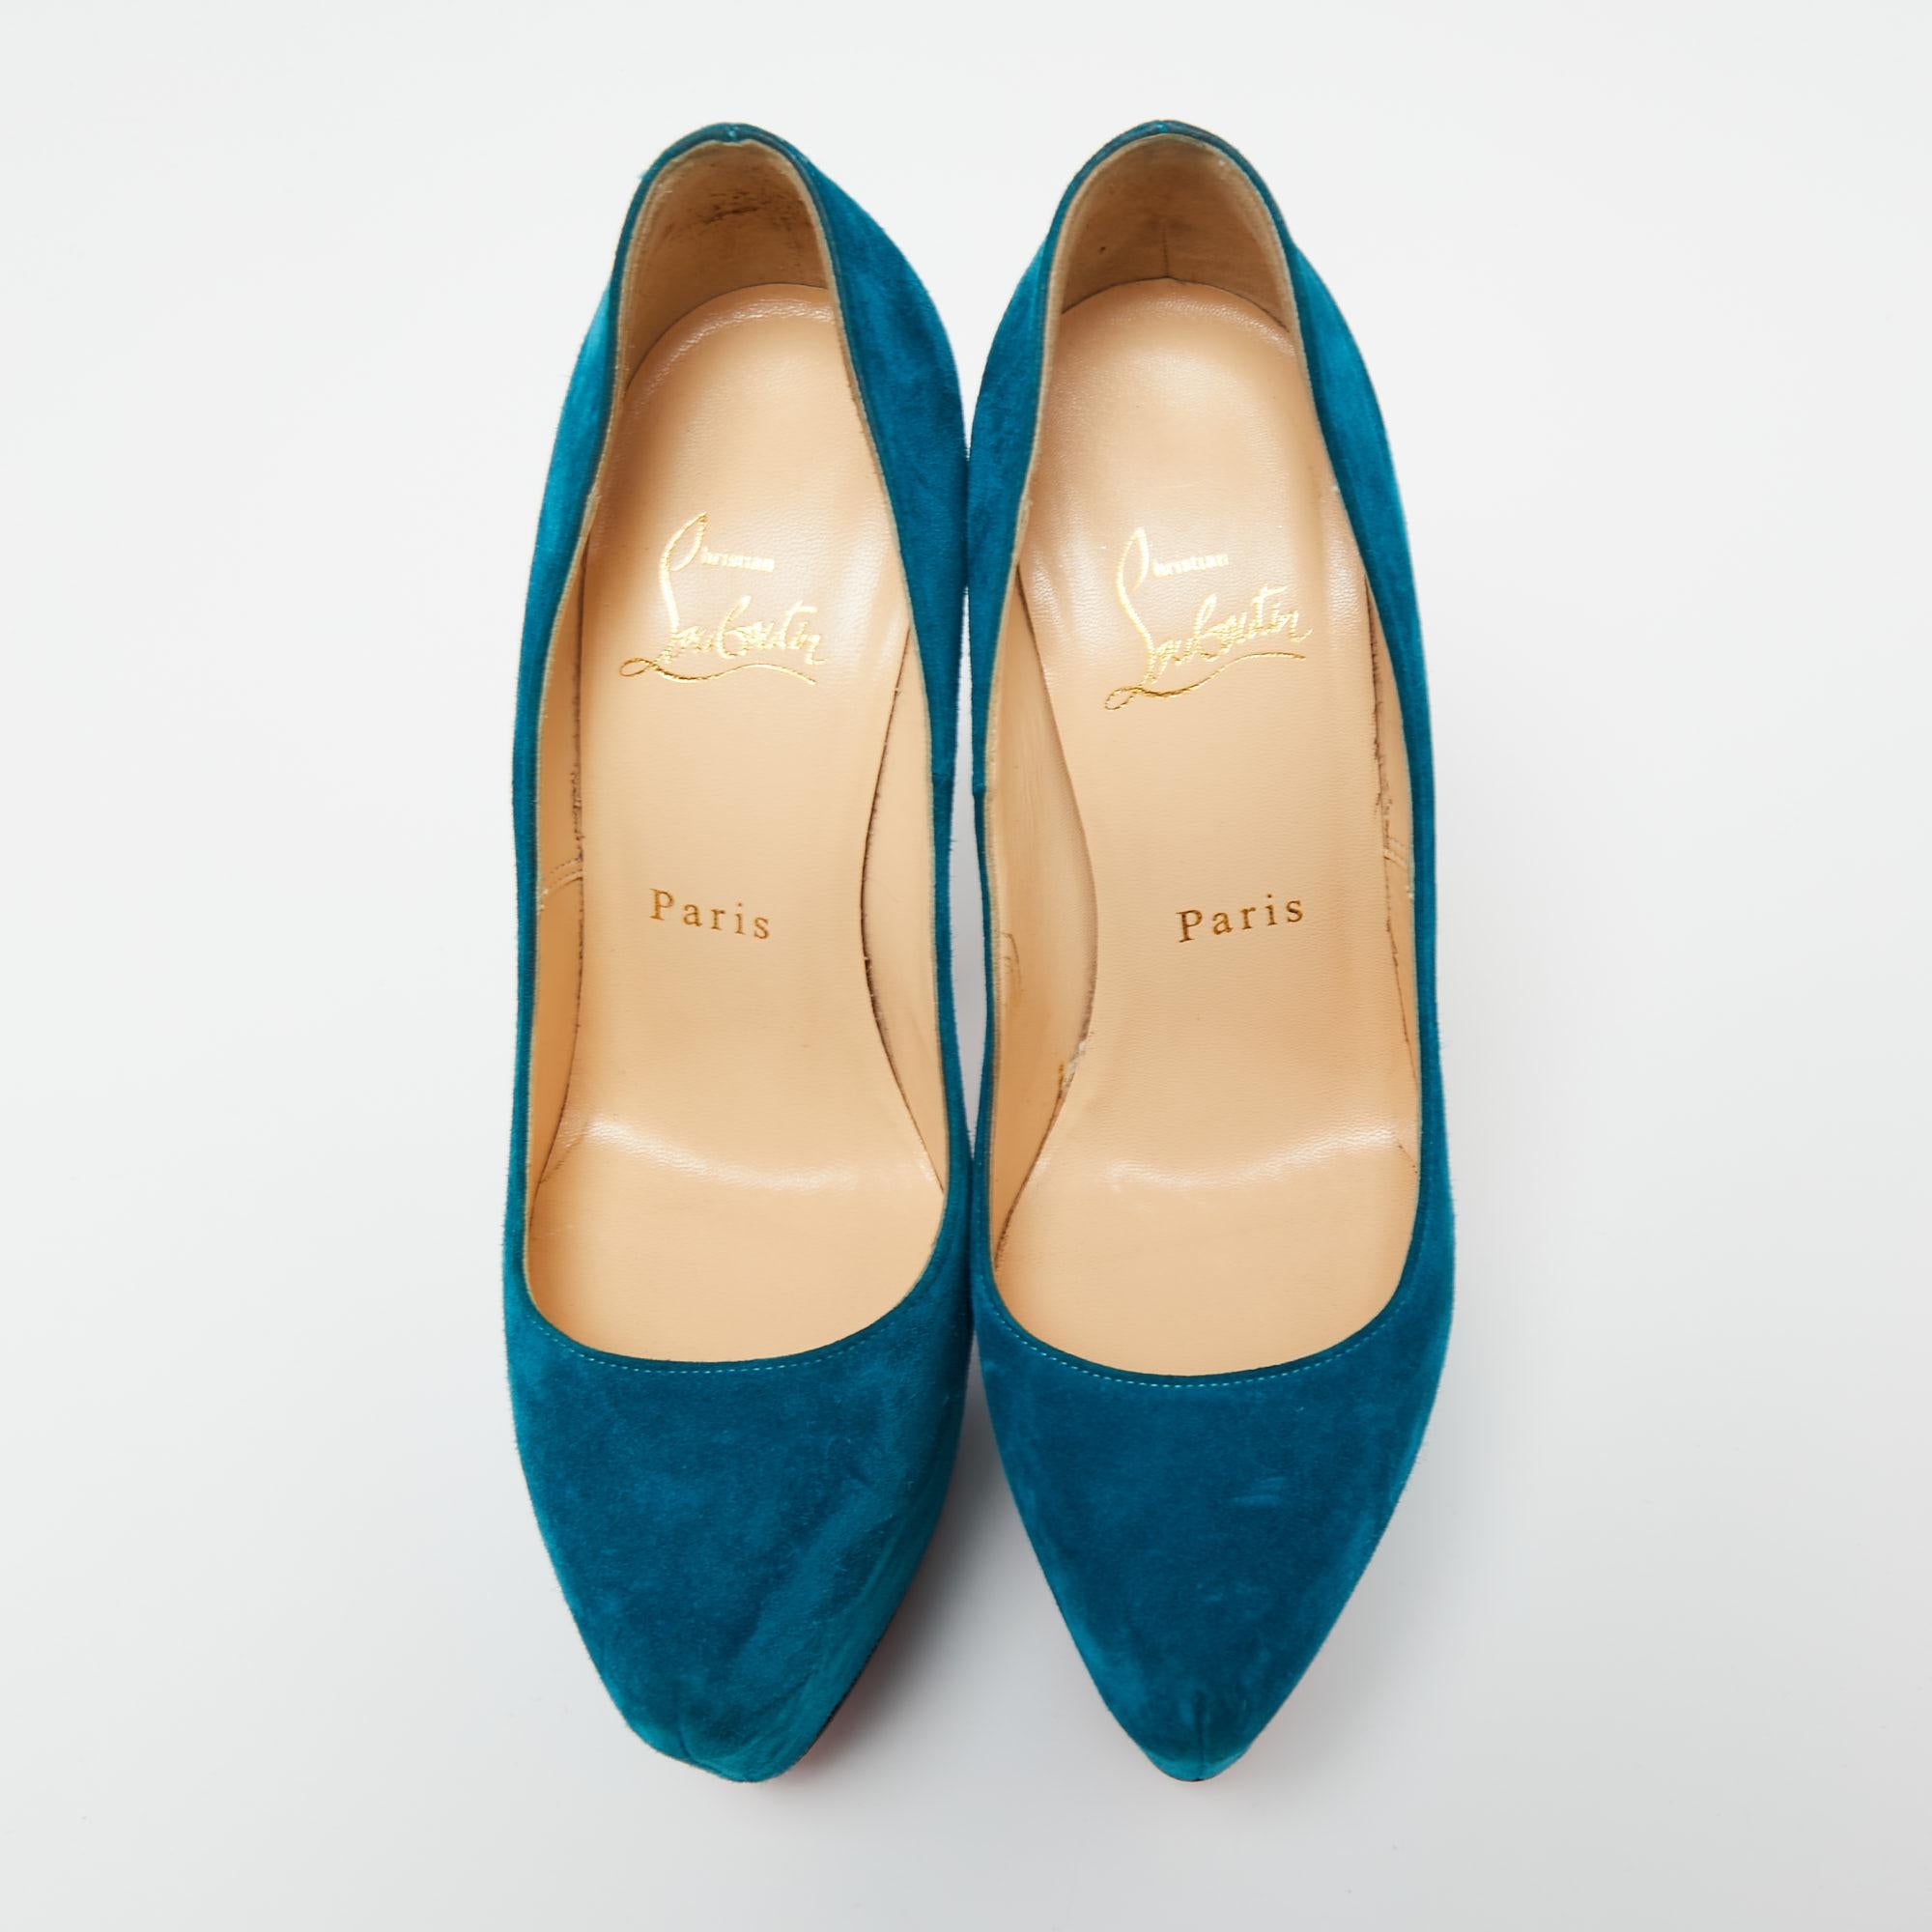 Christian Louboutin's timeless aesthetic and impeccable craftsmanship in shoemaking is evident in these statement pumps. Made from suede in a teal blue shade, the sleek cuts will accentuate the curve of your feet. Finished off with high heels and